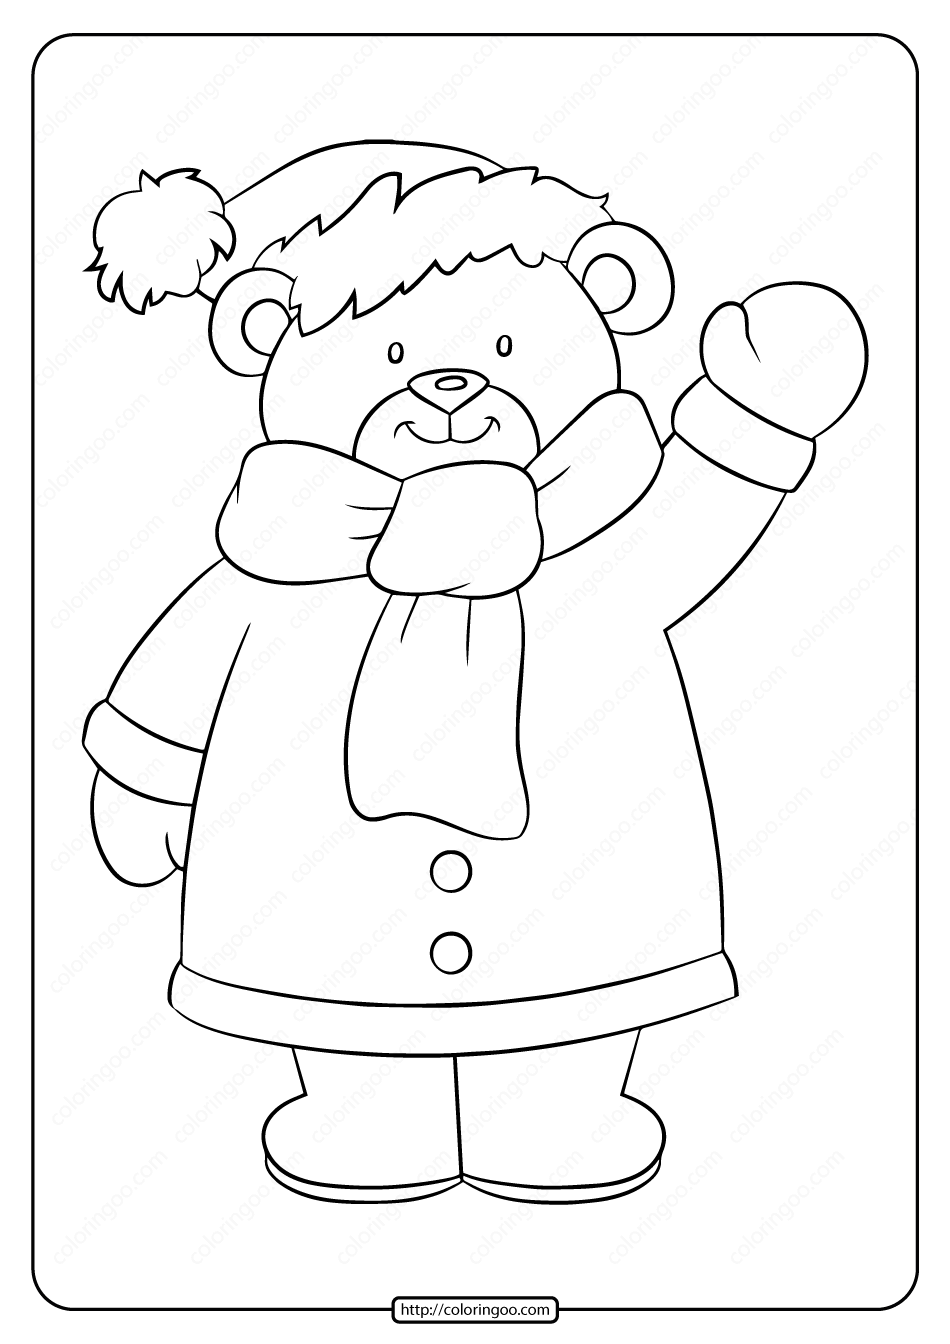 printable a cute little teddy bear pdf coloring page